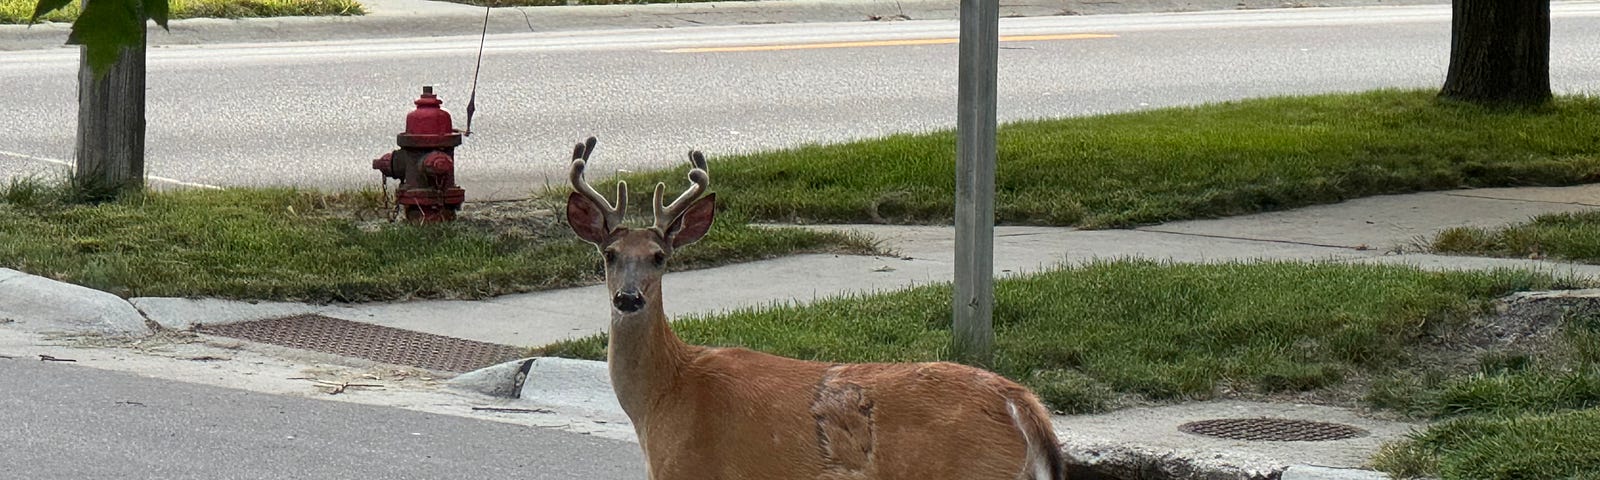 This is a photo of a mature deer on a street looking directly at me.